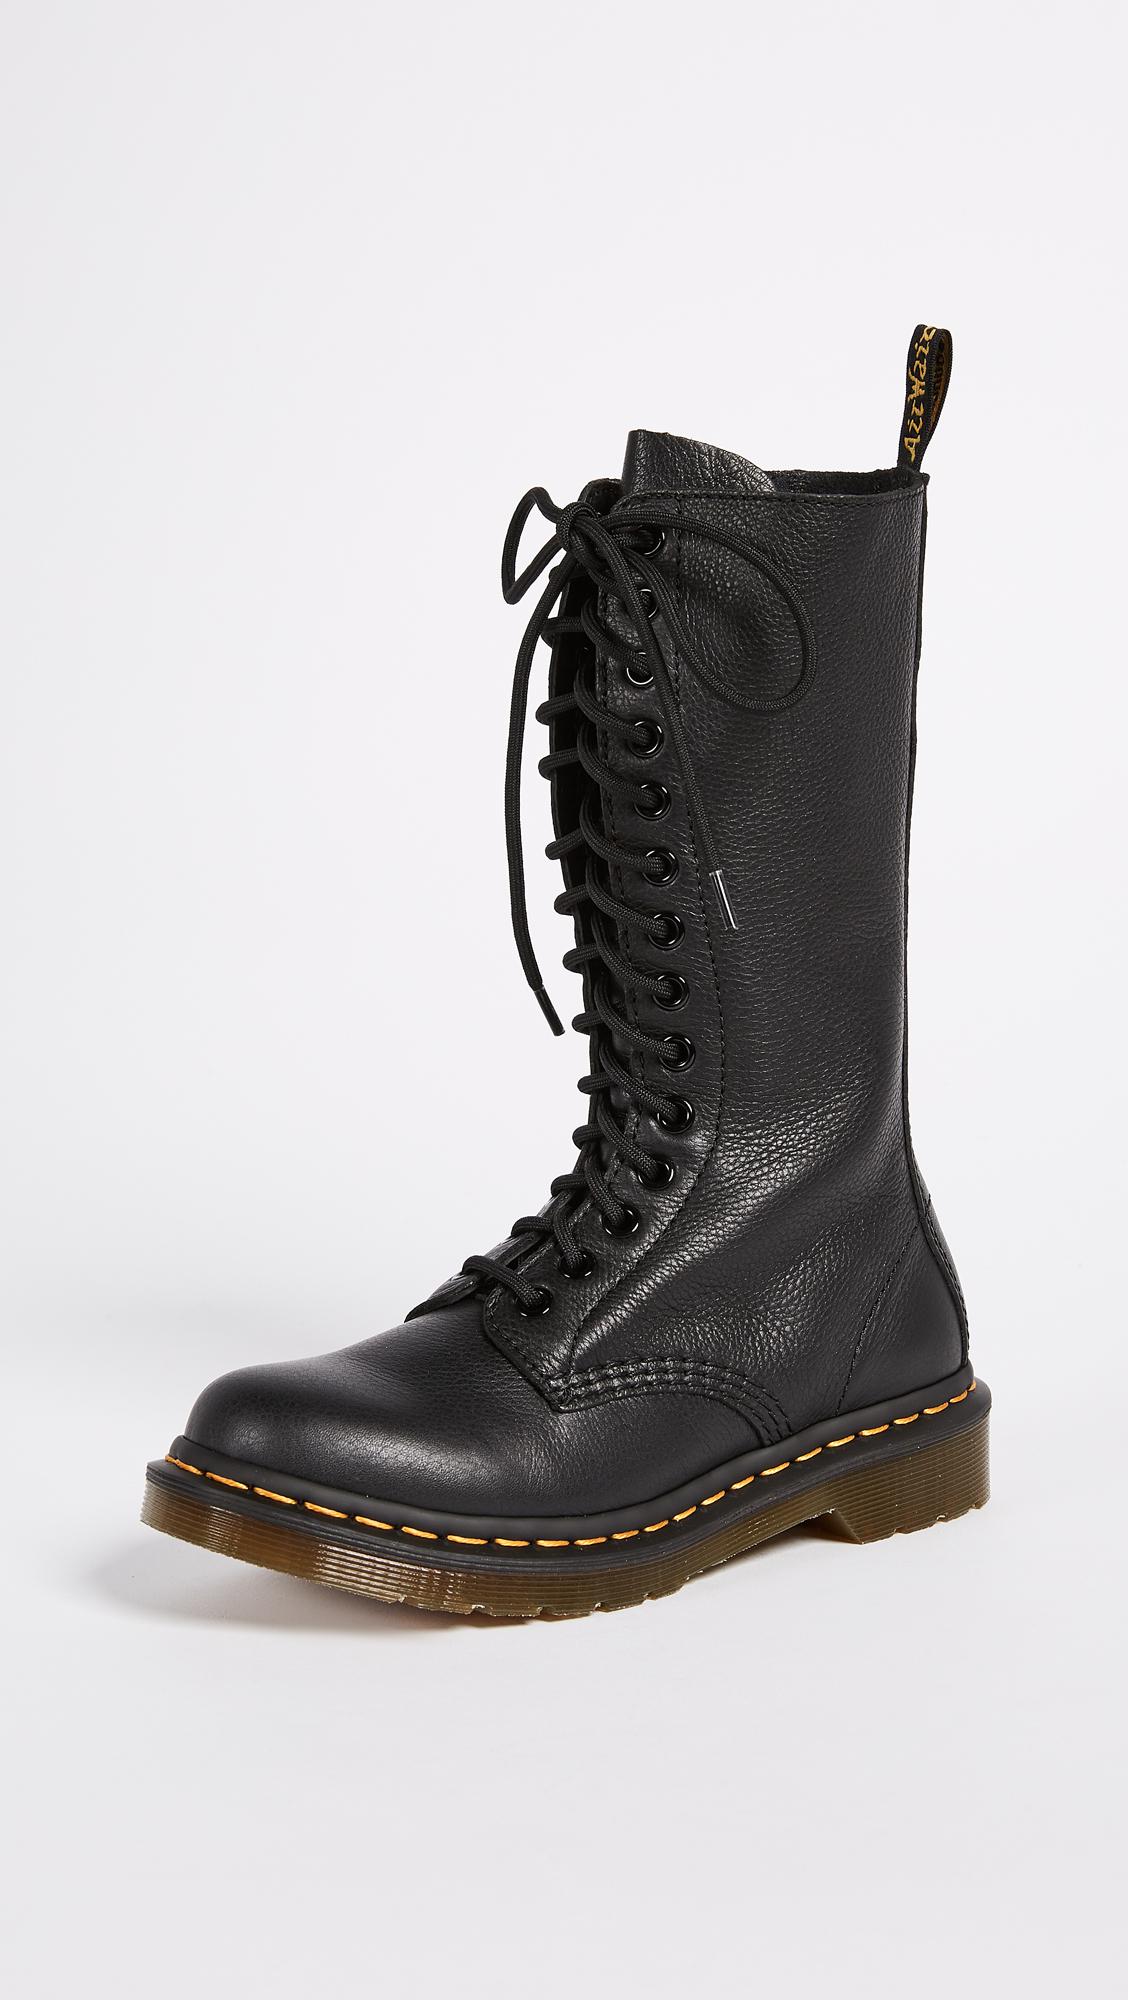 Dr. Martens Leather 1b99 14 Eye Zip Boots in Black - Lyst